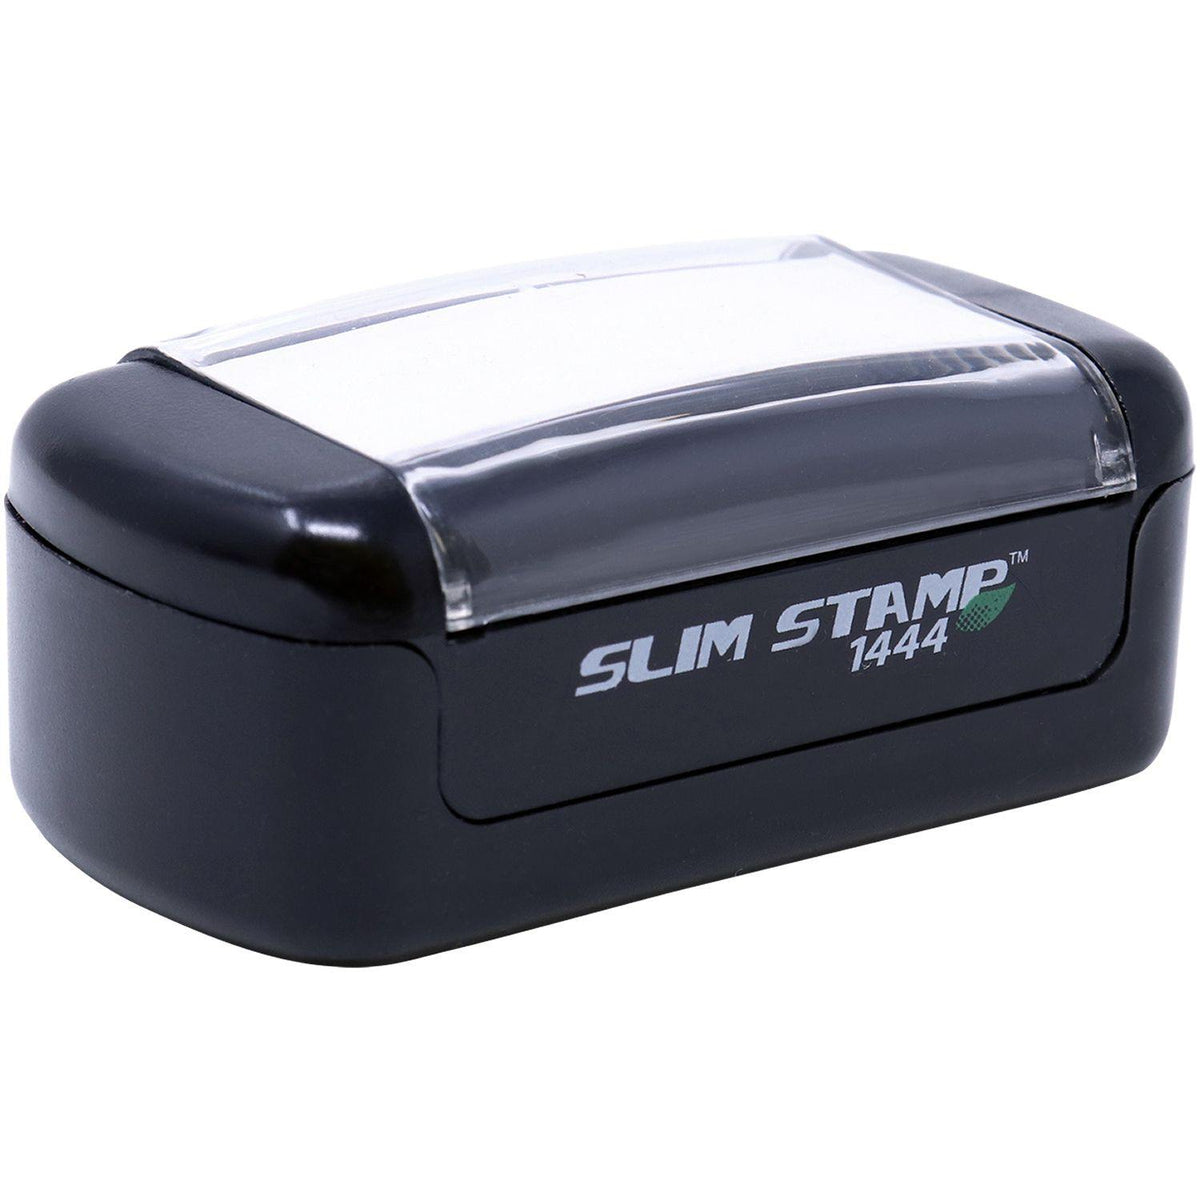 Alt View of Slim Pre-Inked Express Mail International Stamp Mount Angle